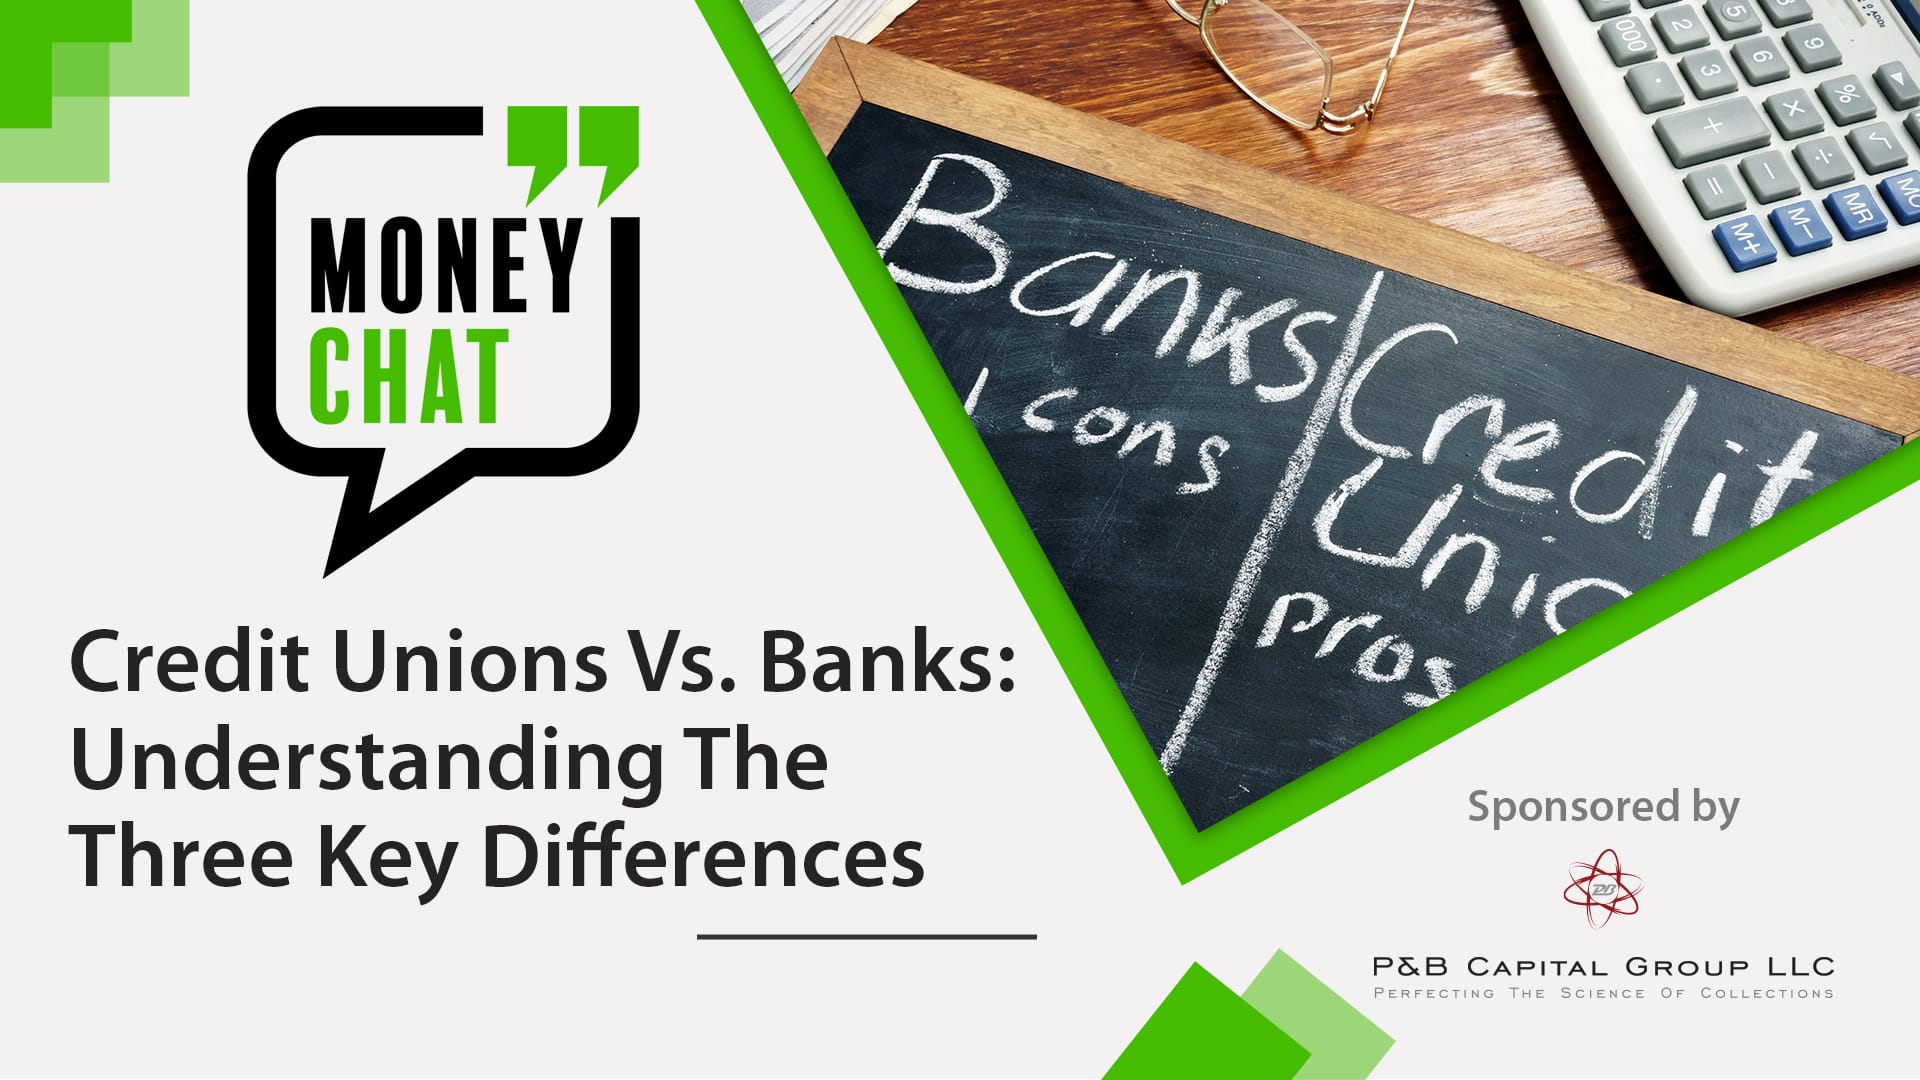 Banks vs. Credit Unions pros and cons written on a blackboard.